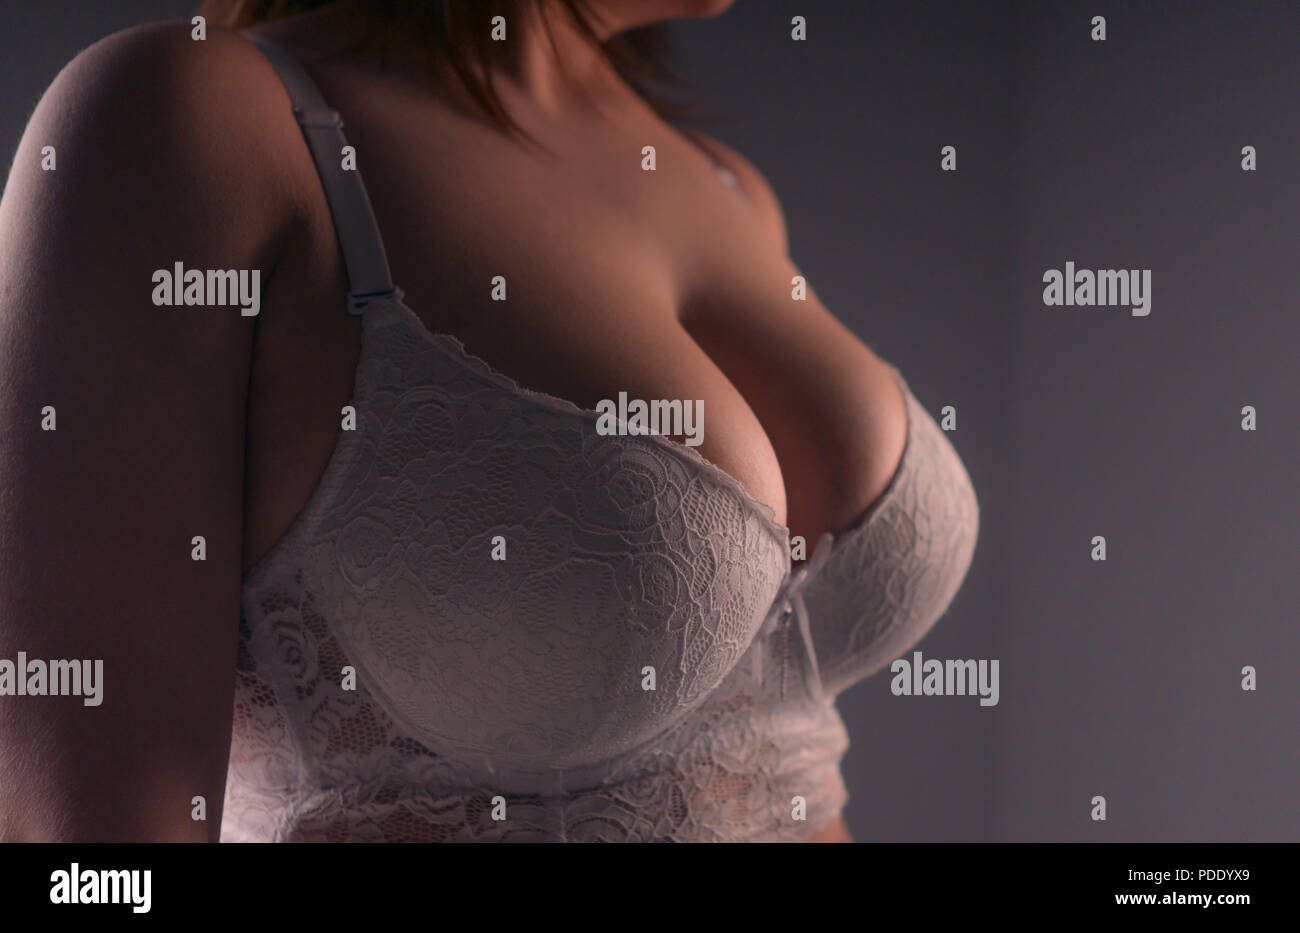 Sexy girl with large breasts posing Stock Photo - Alamy